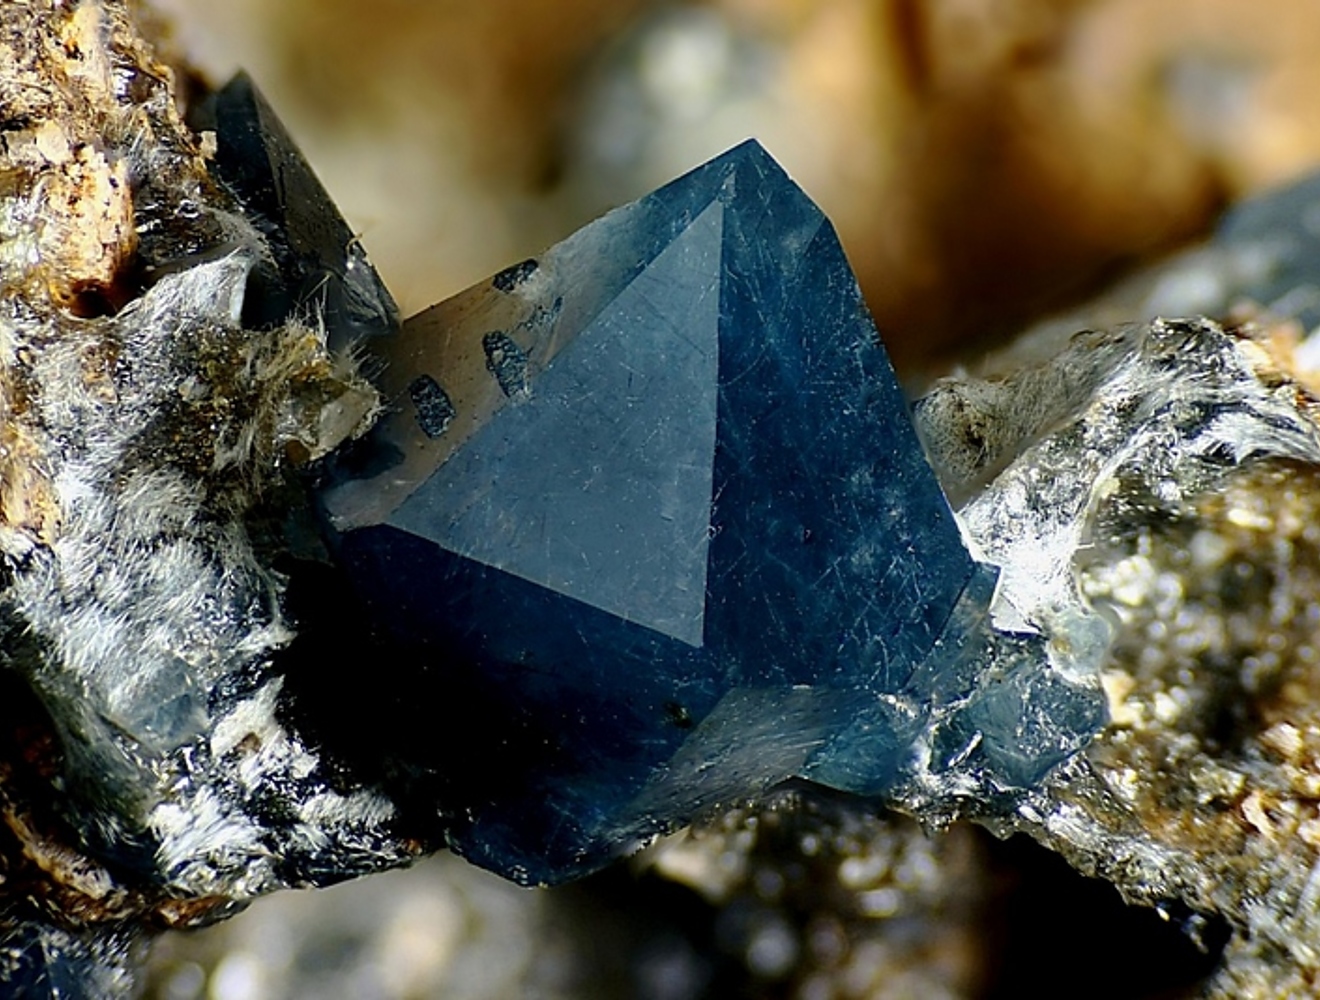 Siberian Blue Quartz : Occurrence, Locations » Geology Science